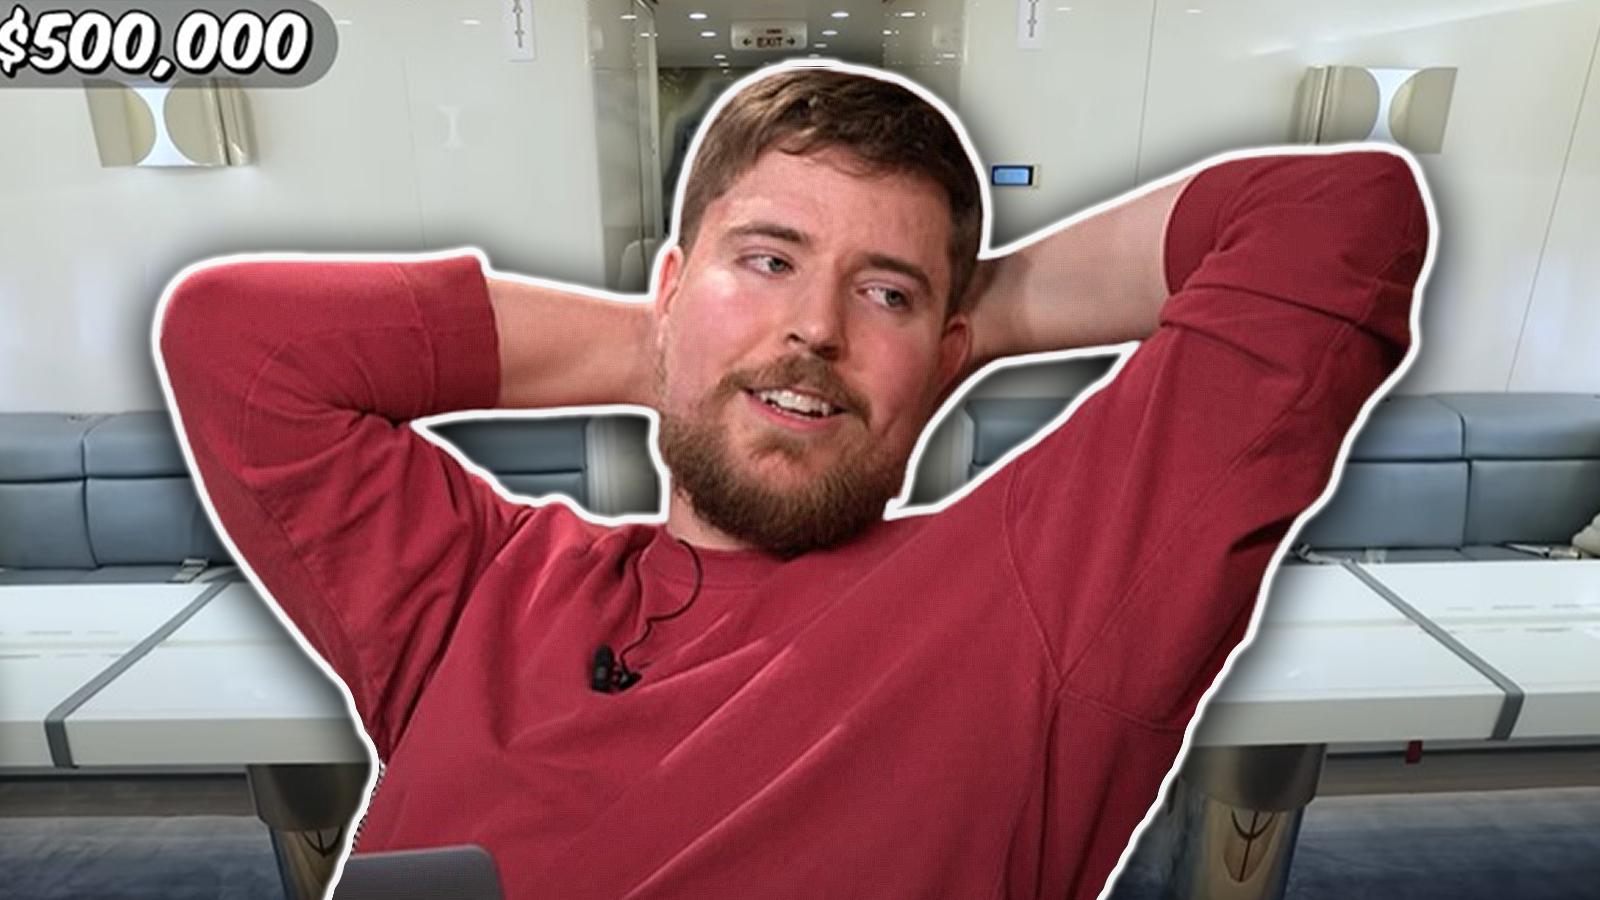 YouTuber claims mrbeast wasnt paid for extravagant airline video